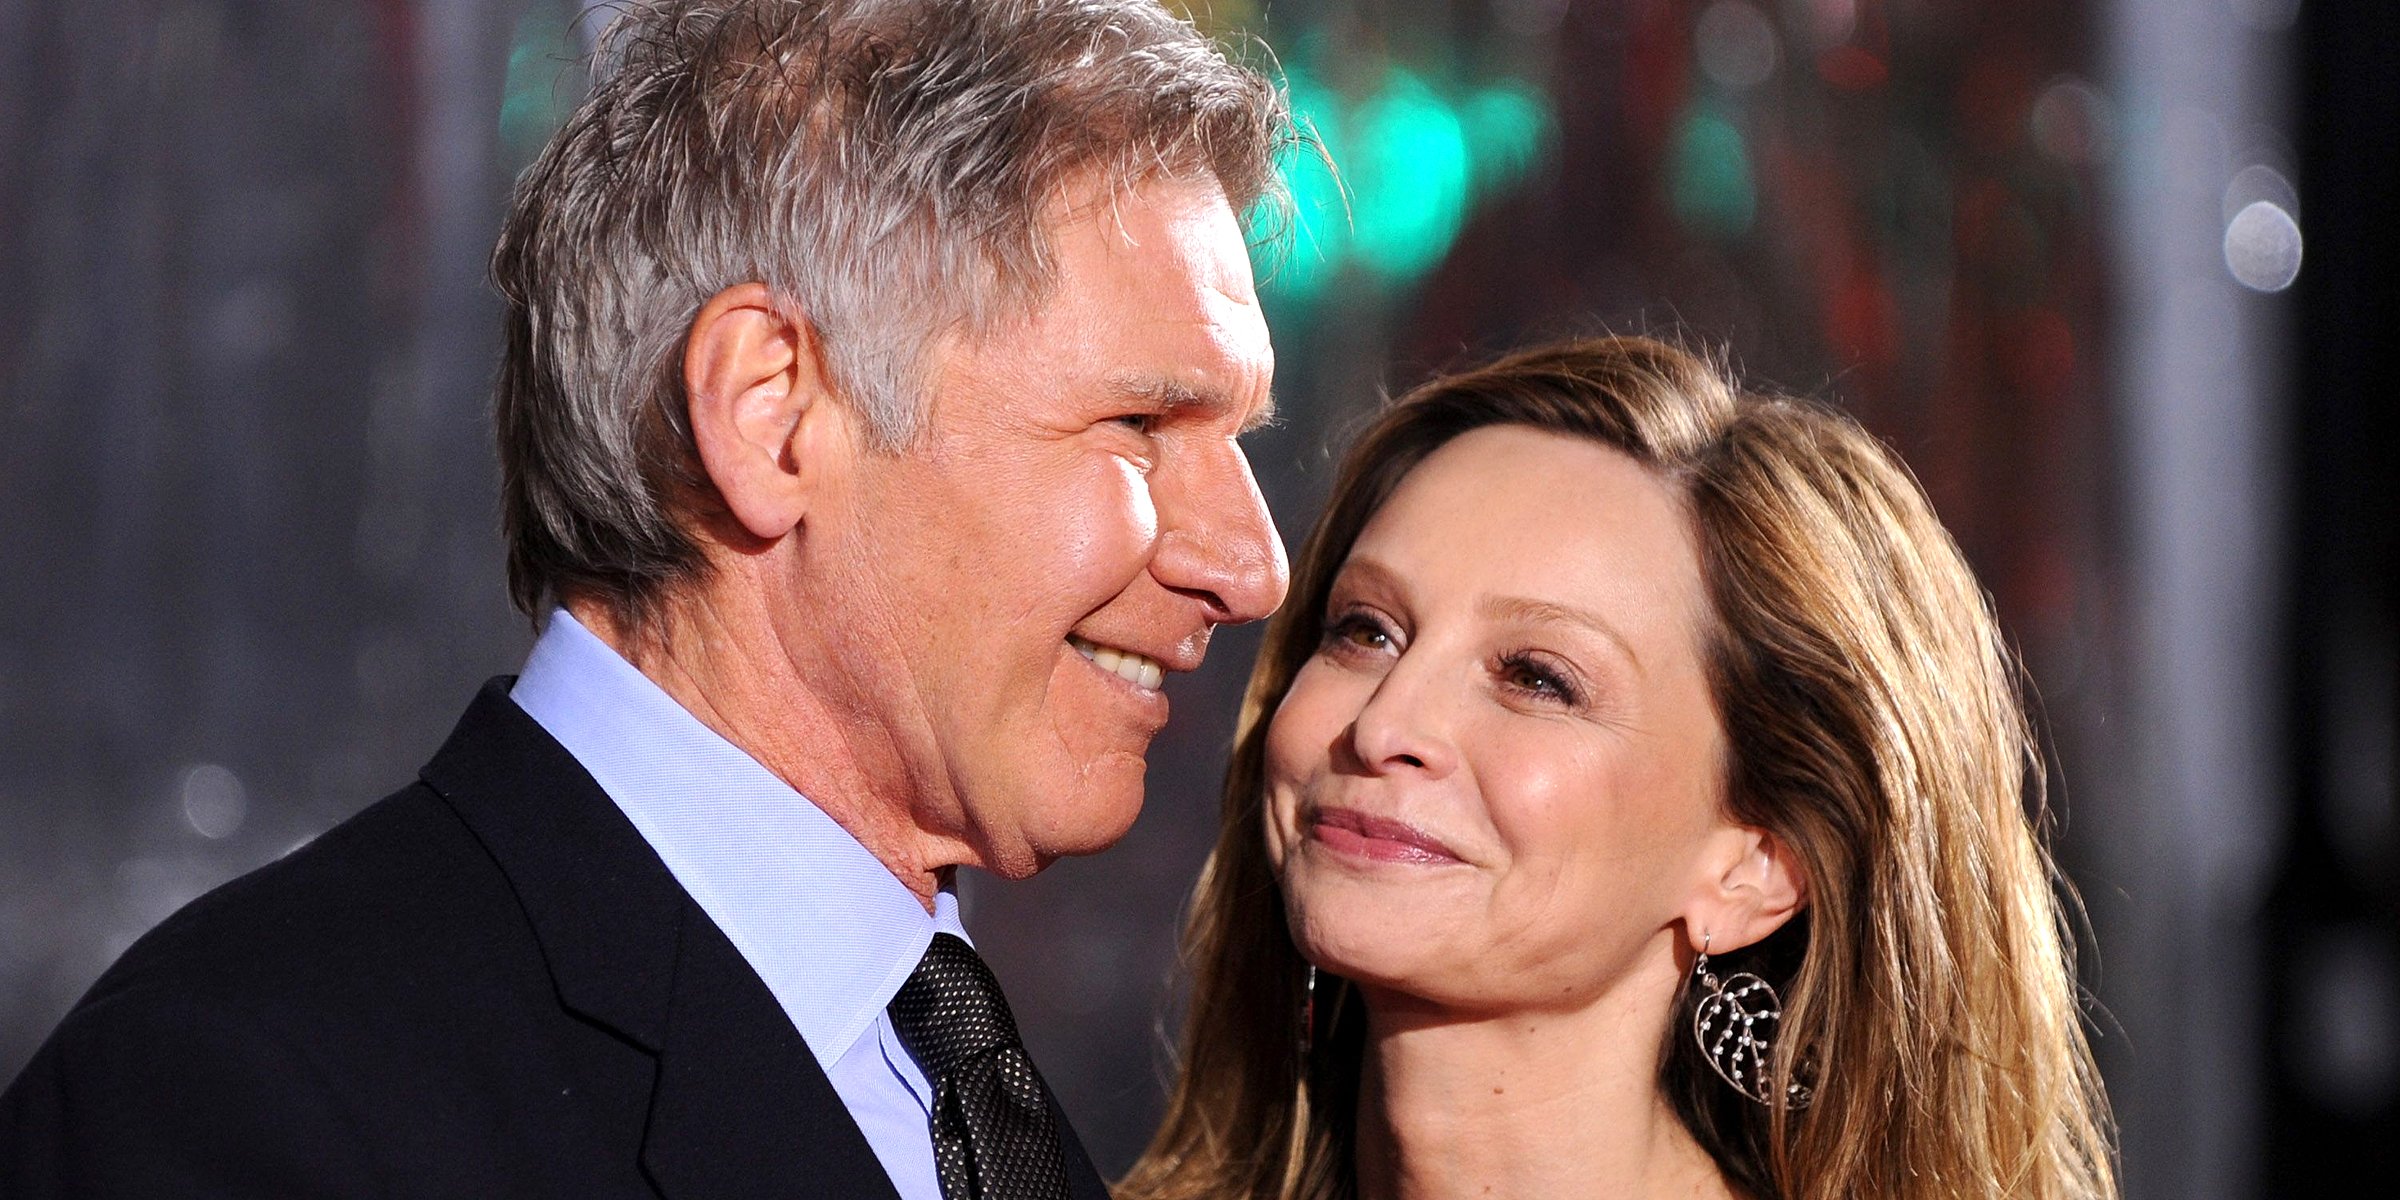 Harrison Ford and Calista Flockhart, 2010 | Source: Getty Images